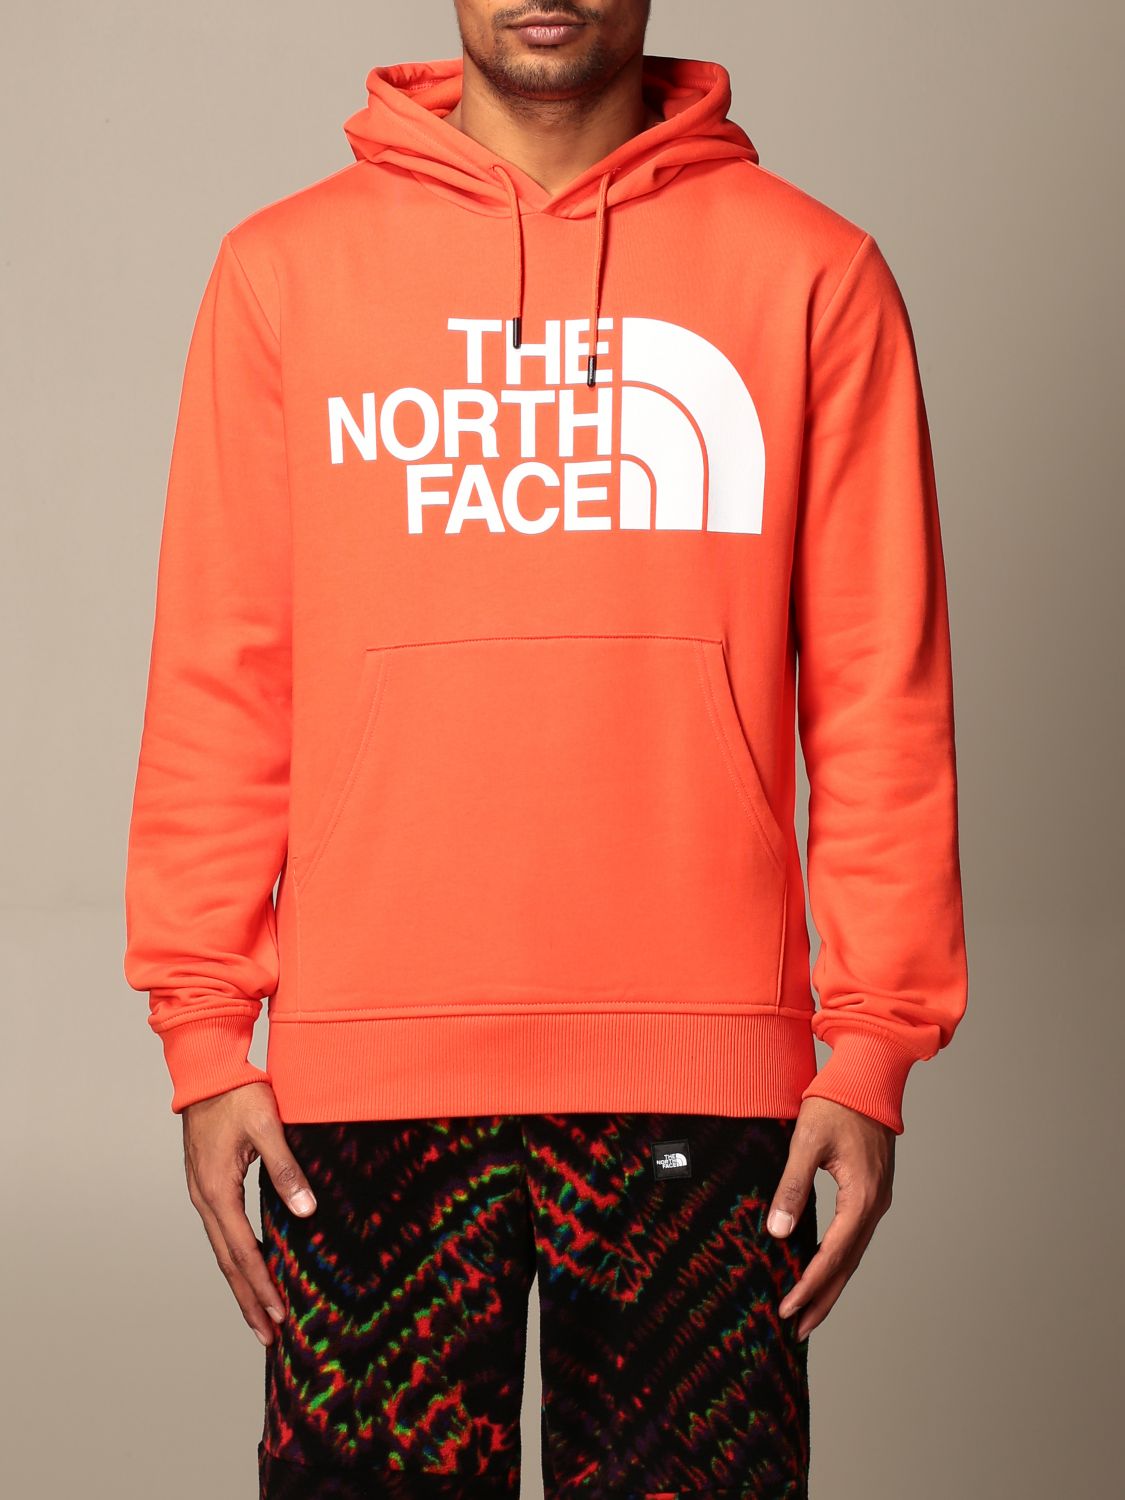 The North Face Outlet: Sweatshirt homme 